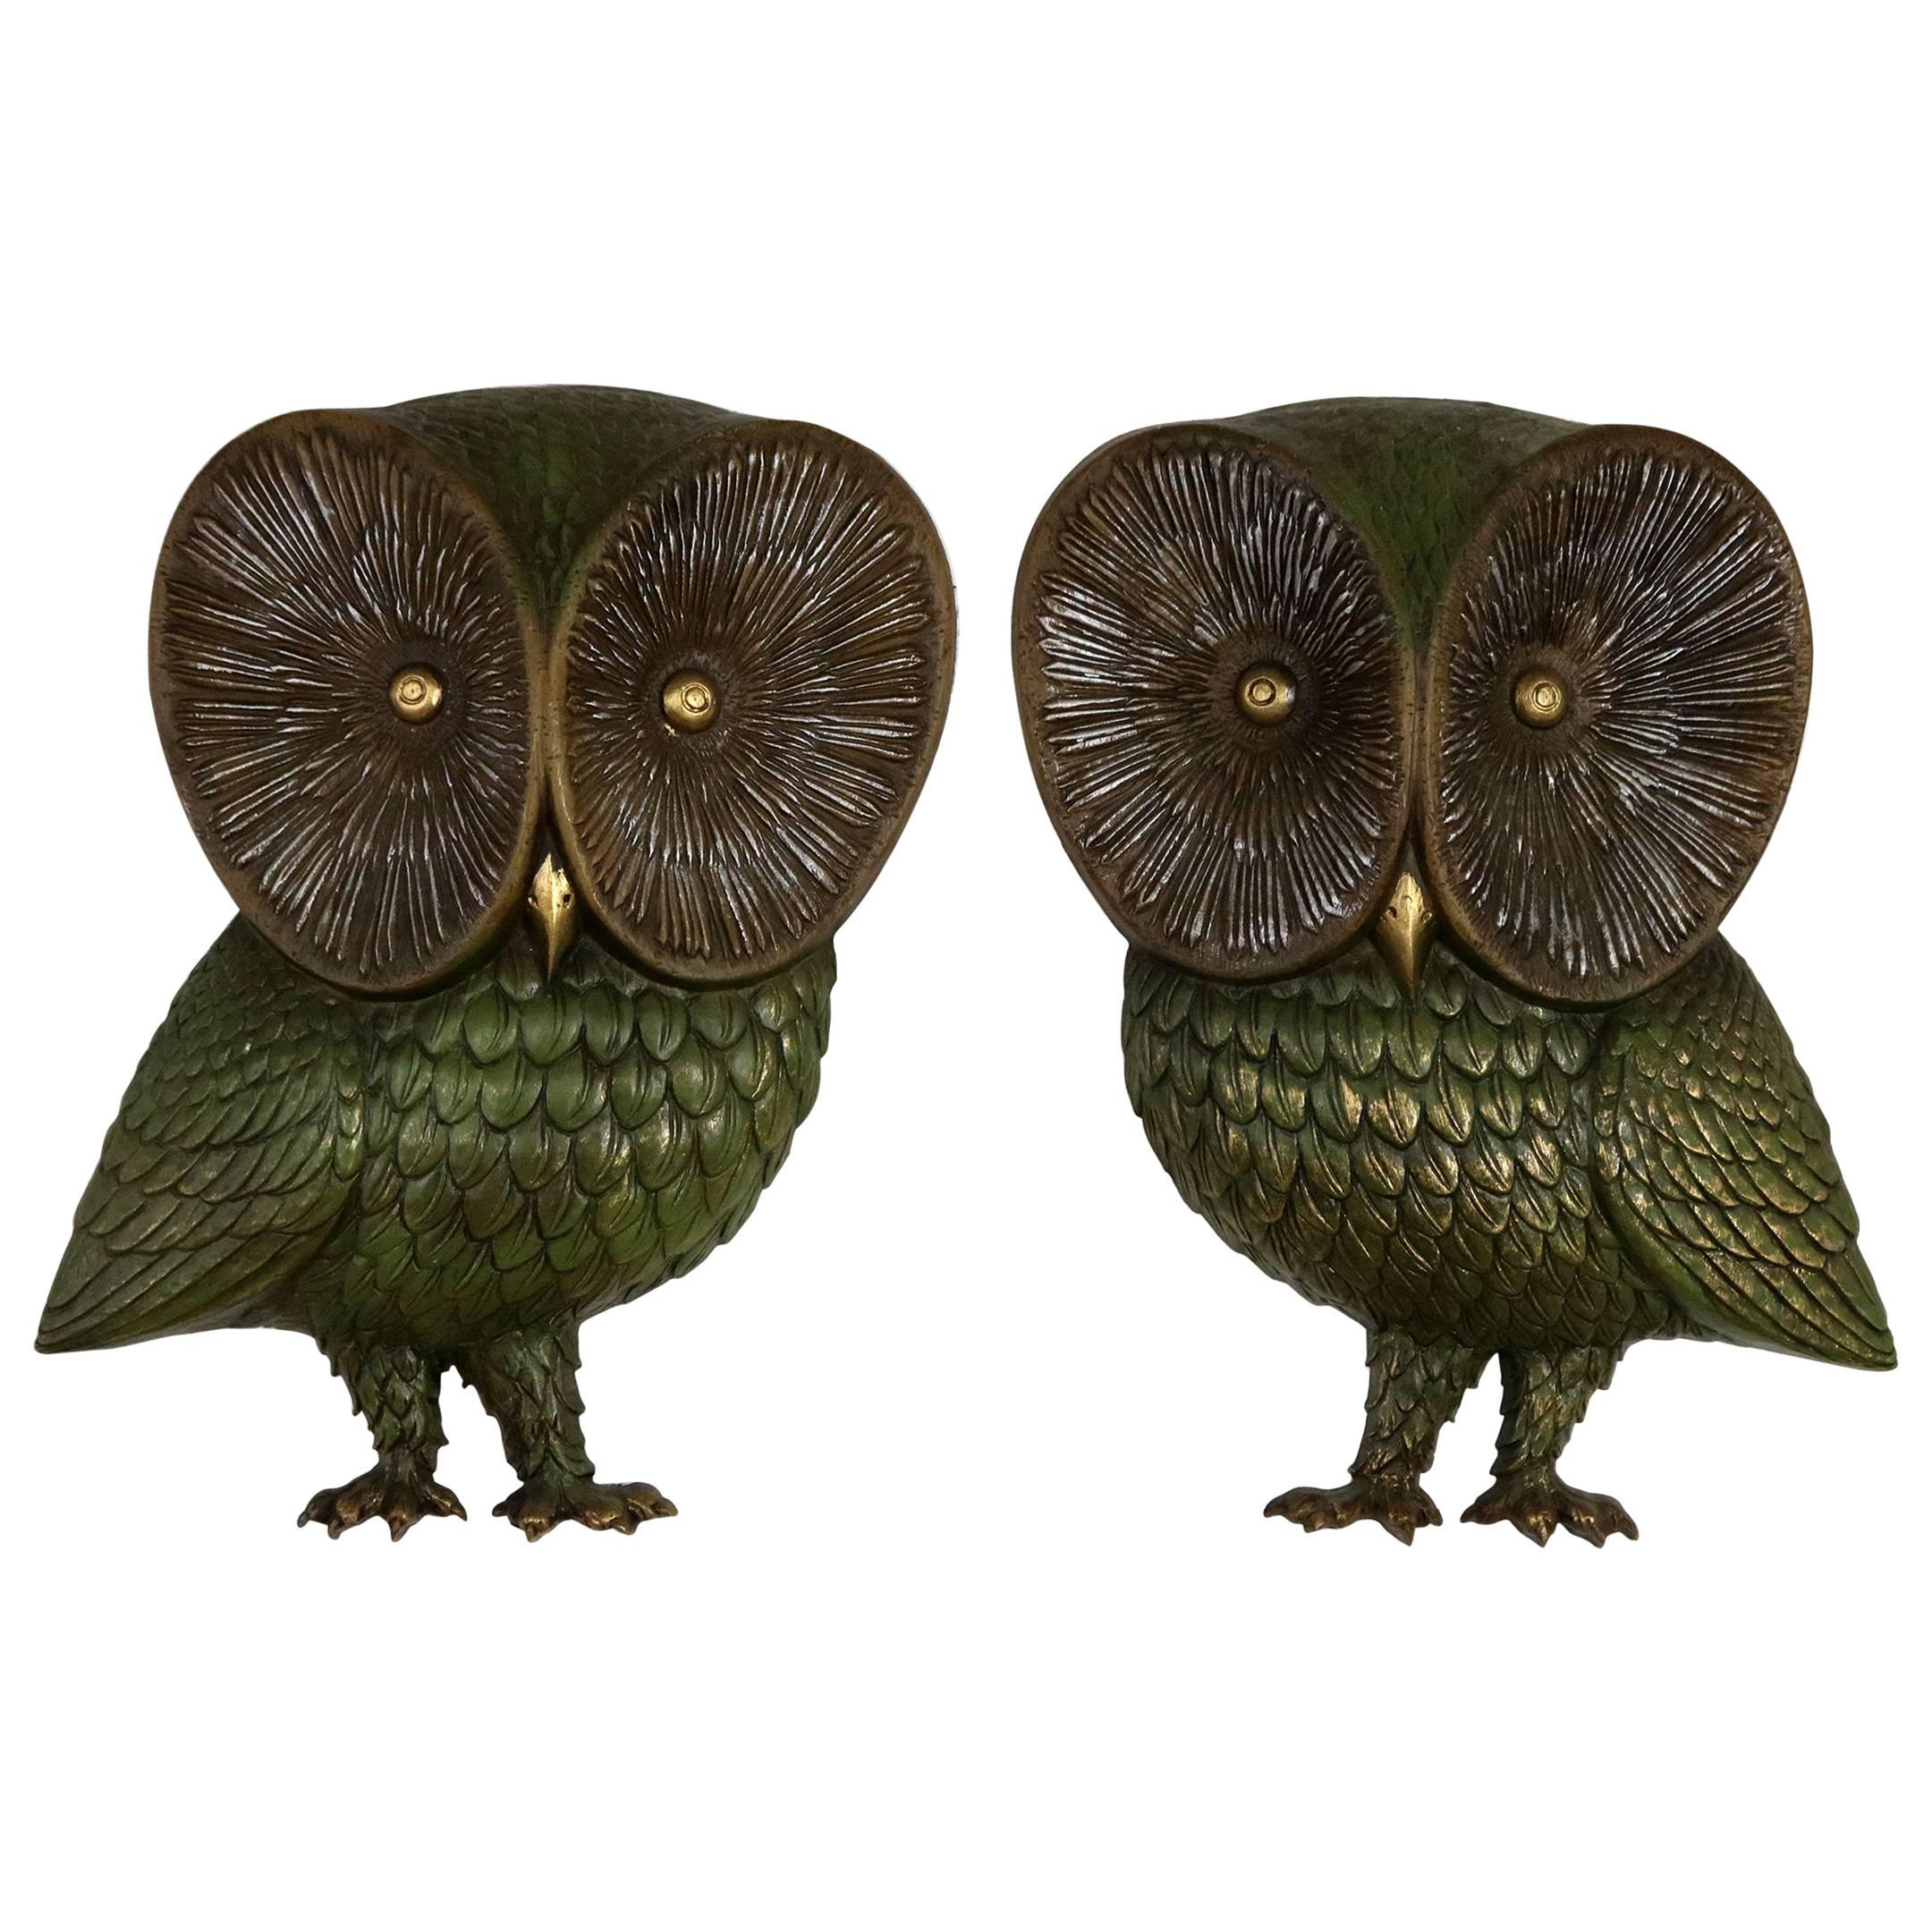 Owl Wall Hanging Sculpture Plaques by Burwood Product Co Mid-Century Modern Pair